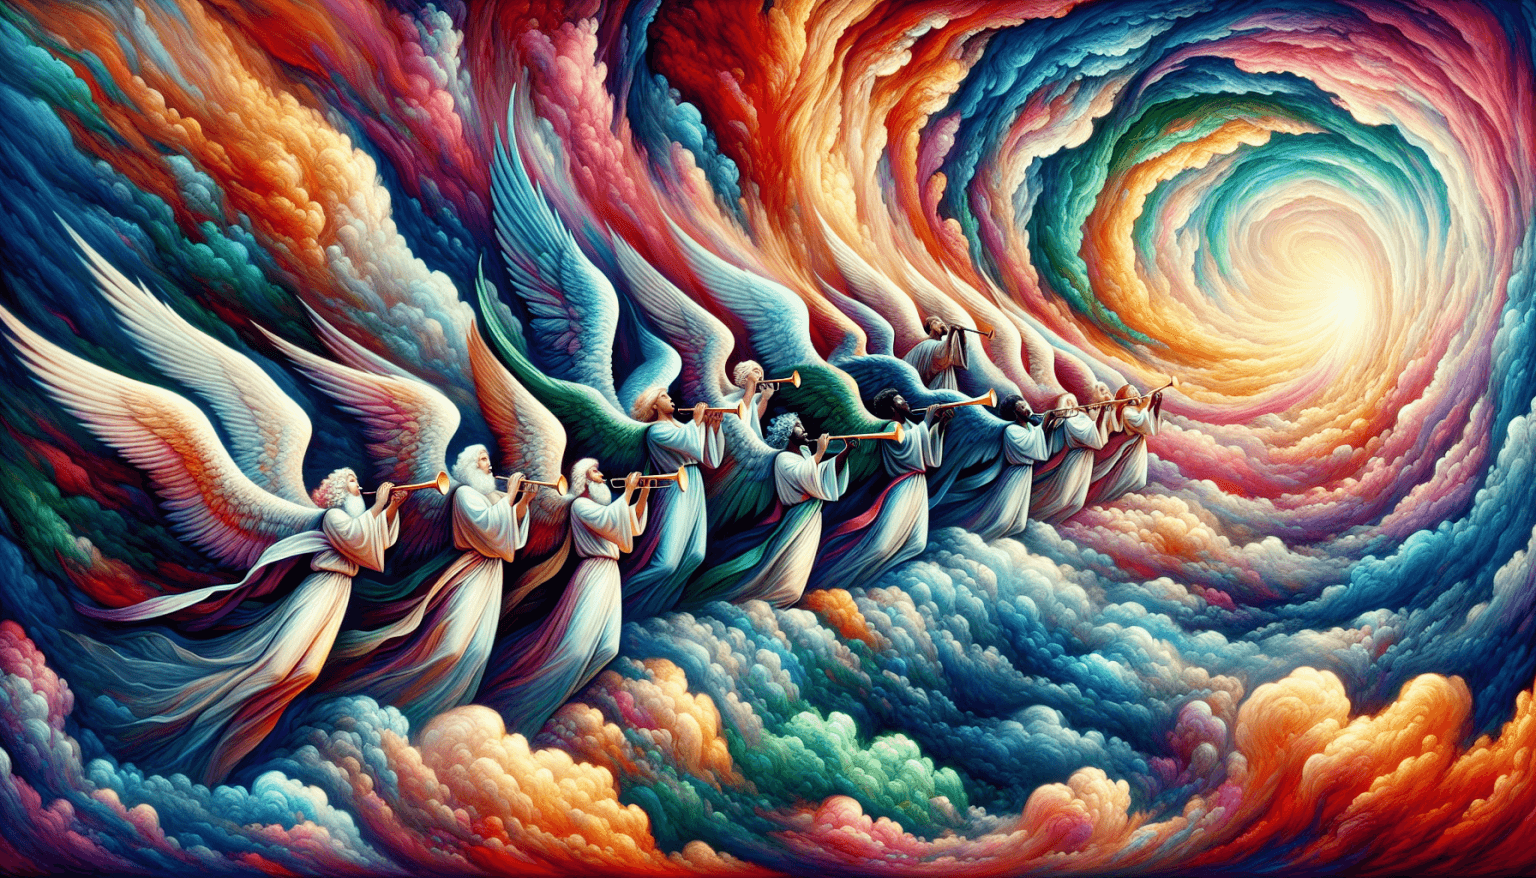 An artistic representation of seven angels playing trumpets against a backdrop of dramatic skies and unfolding mystical events, depicting symbolism from the Book of Revelation.